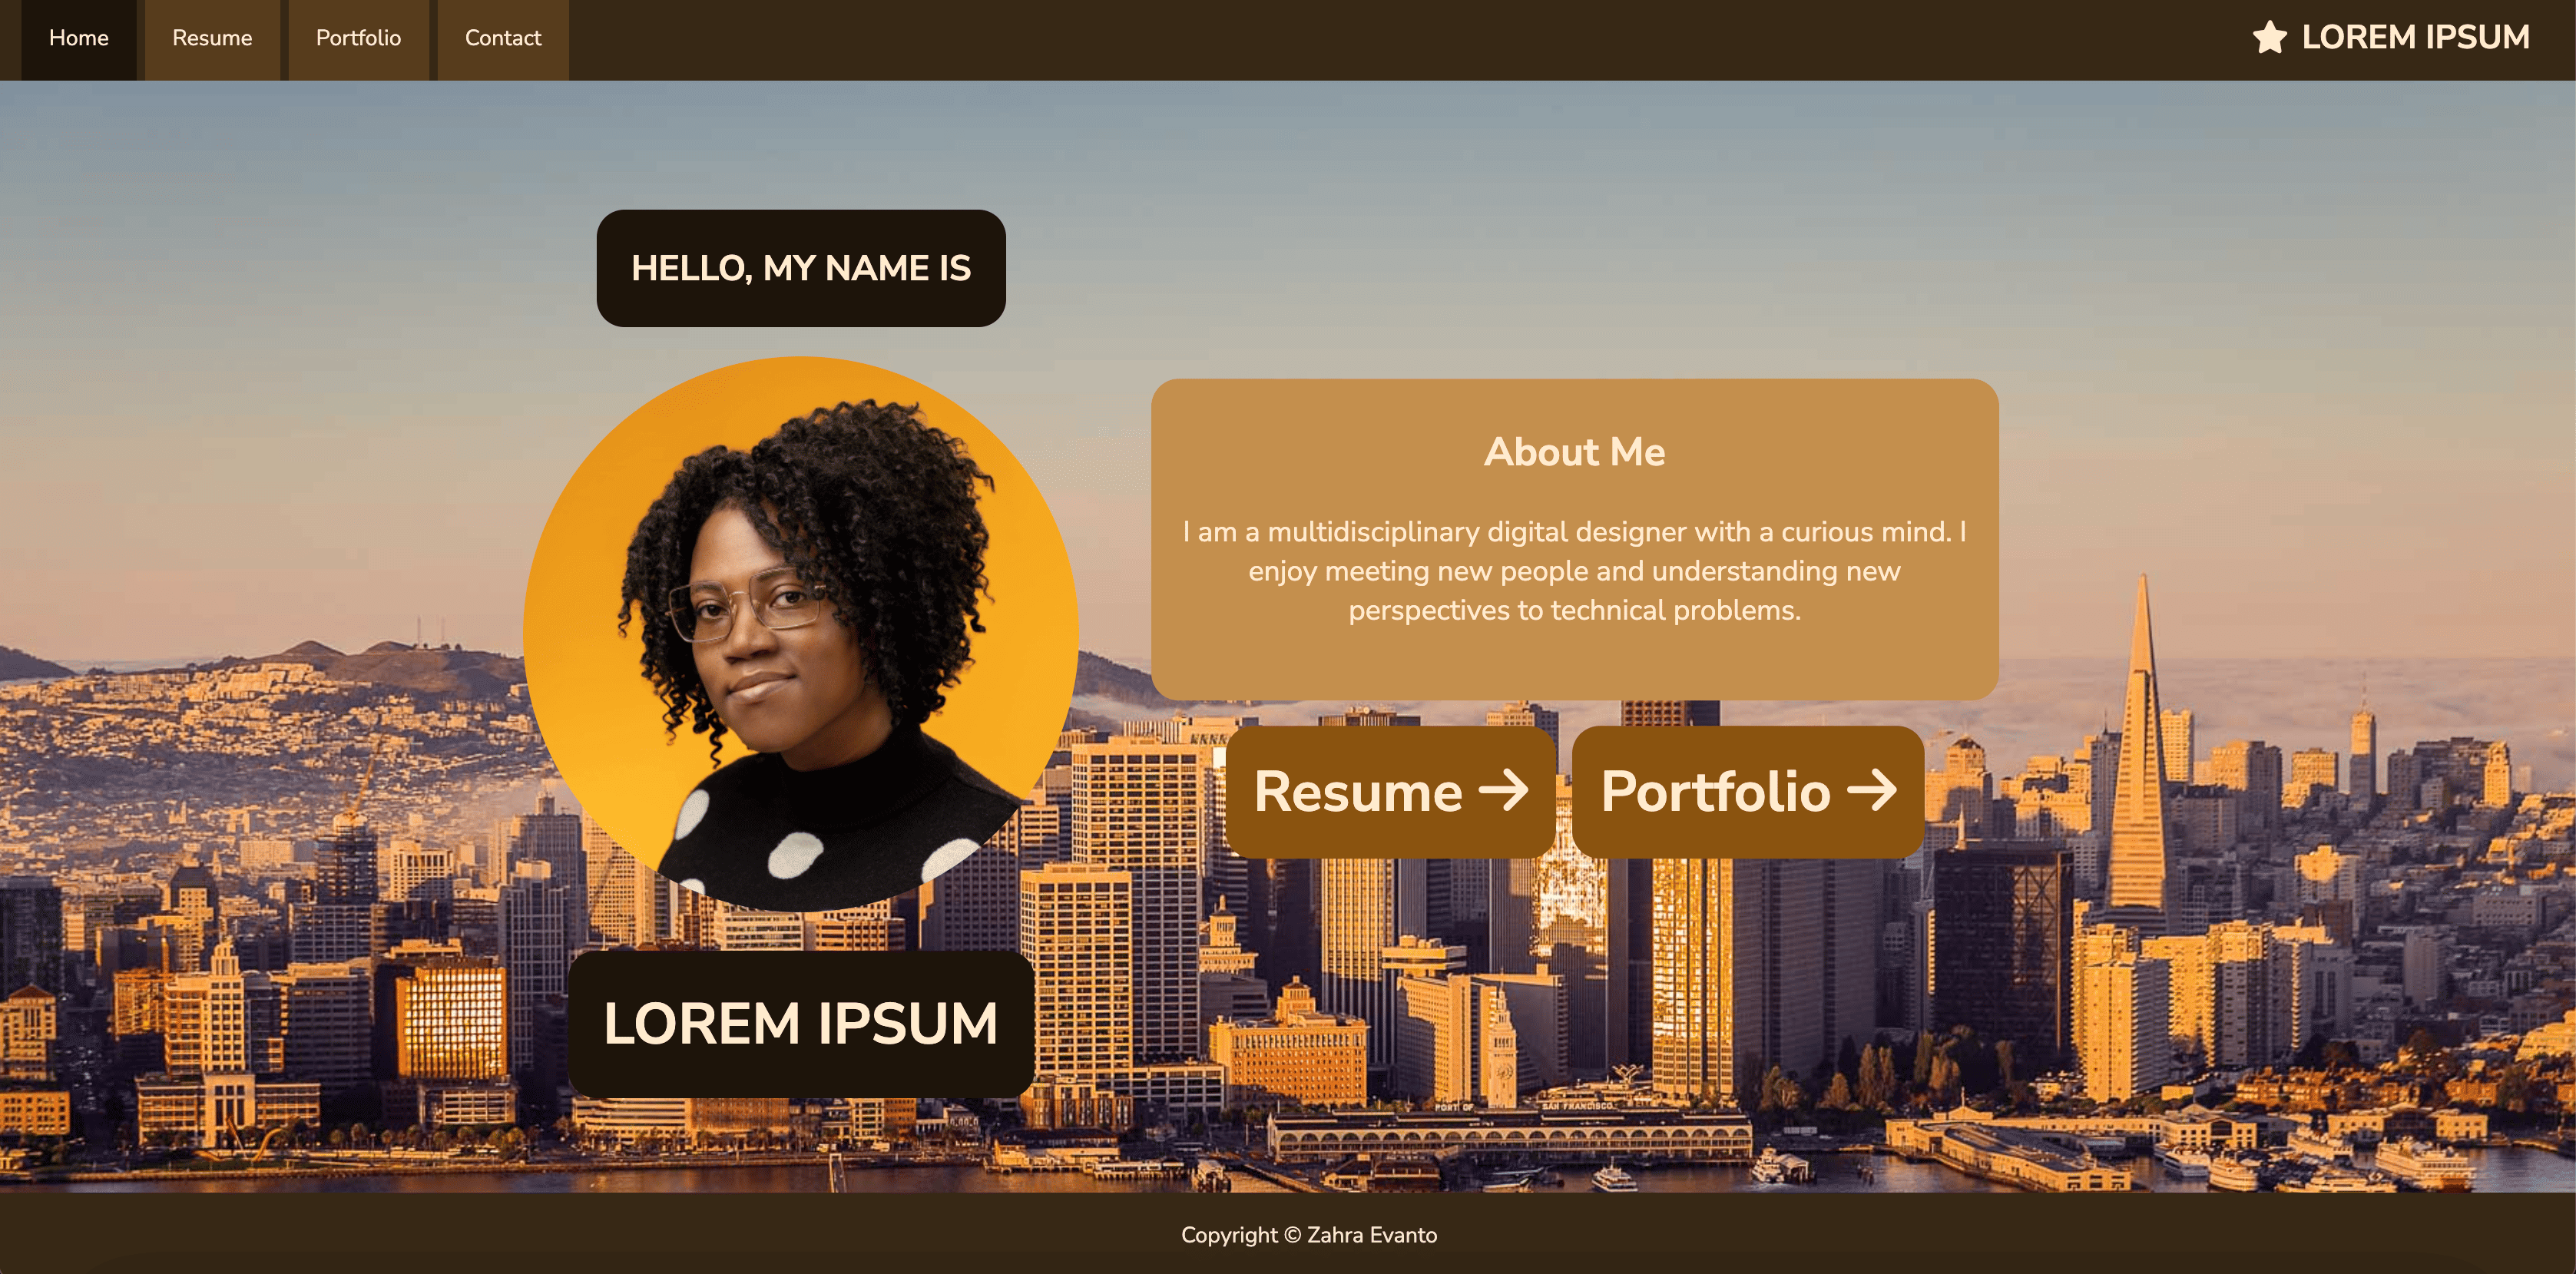 Home page of original resume template.